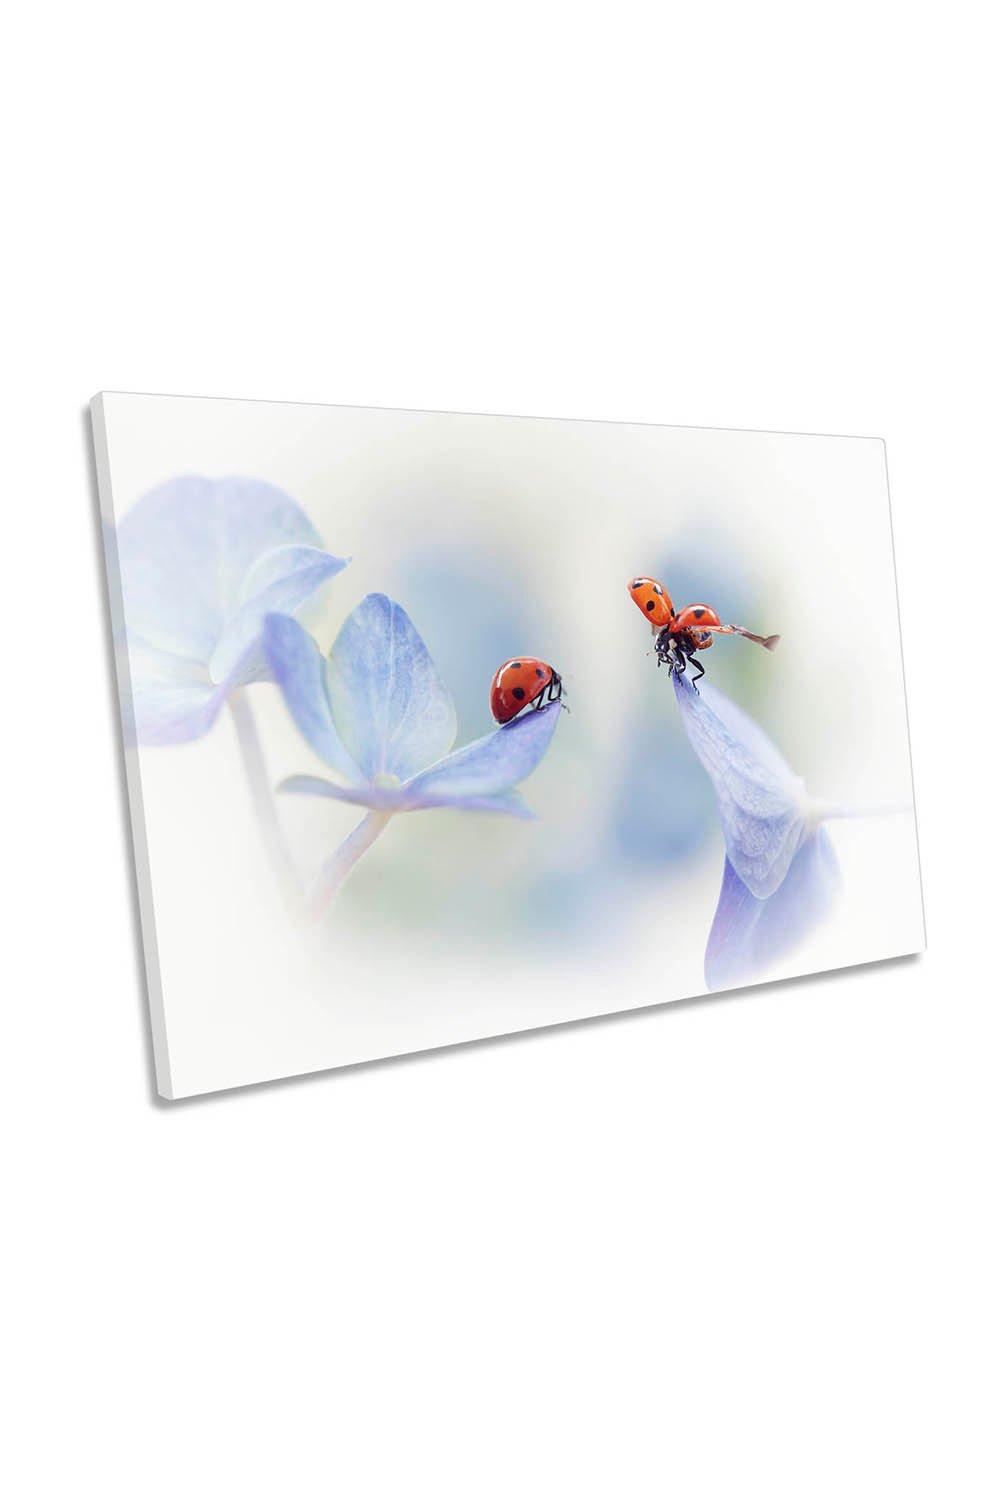 Red Lady Birds Gentle Blue Floral Flower Canvas Wall Art Picture Print